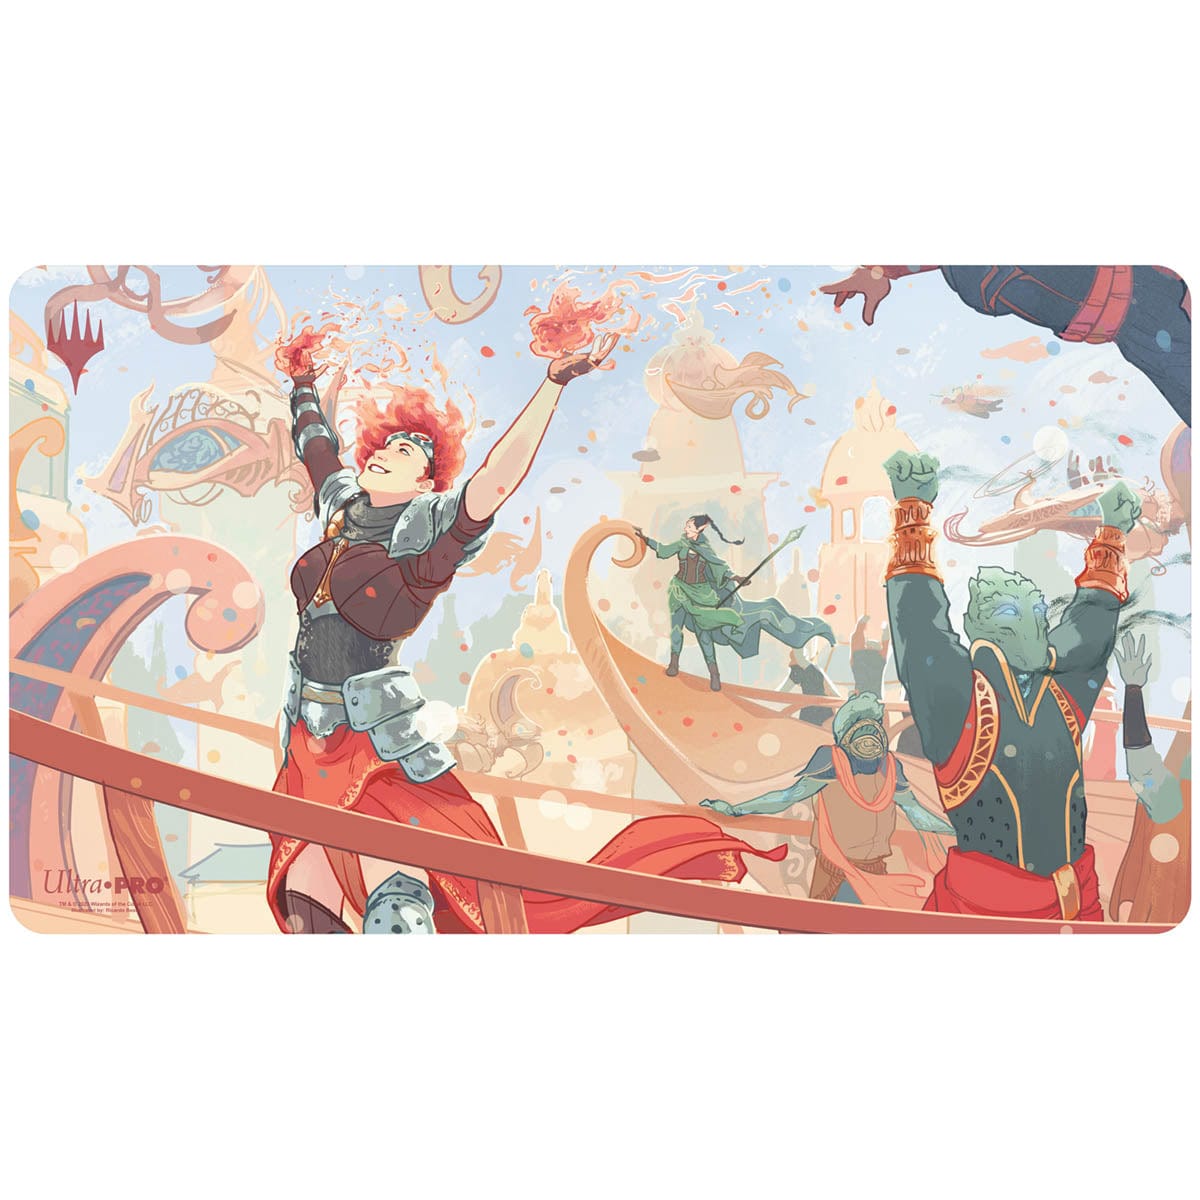 Collective Voyage Playmat (Limited Edition)